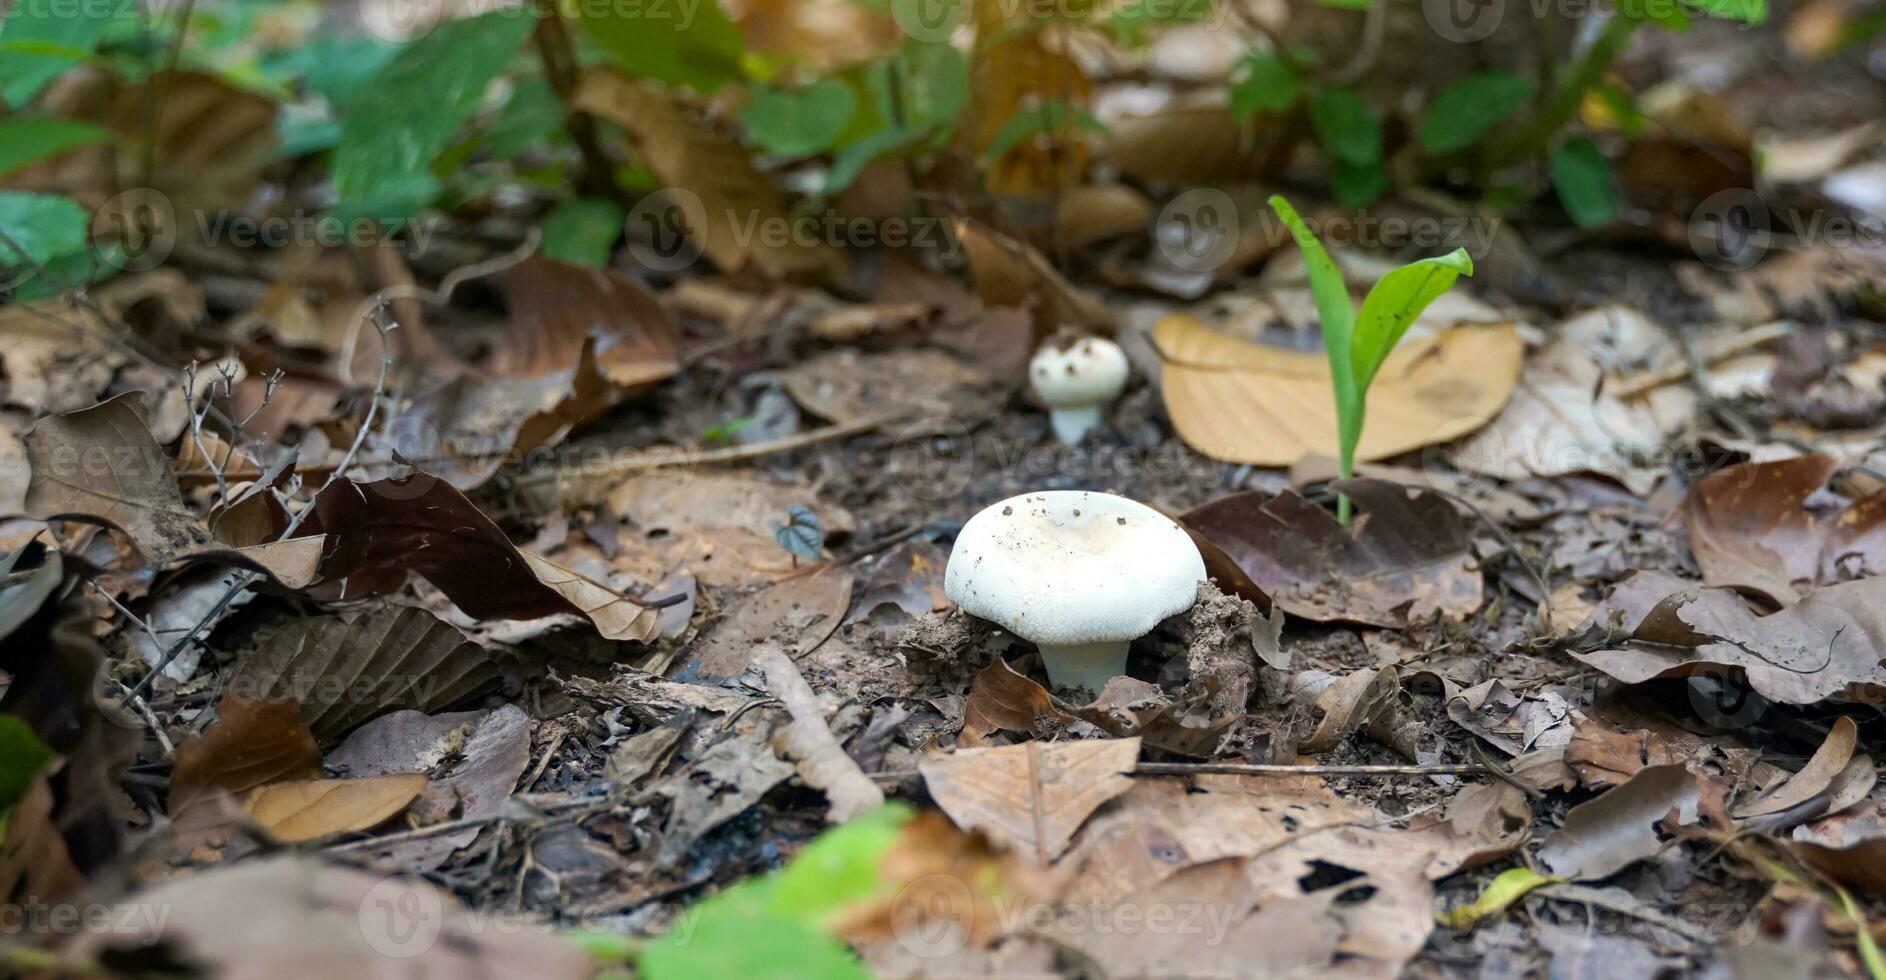 Wild mushrooms grow in the northern forests of Thailand during the rainy season. There are many types, both edible and non-edible, a source of natural fat-free protein suitable for cooking. photo